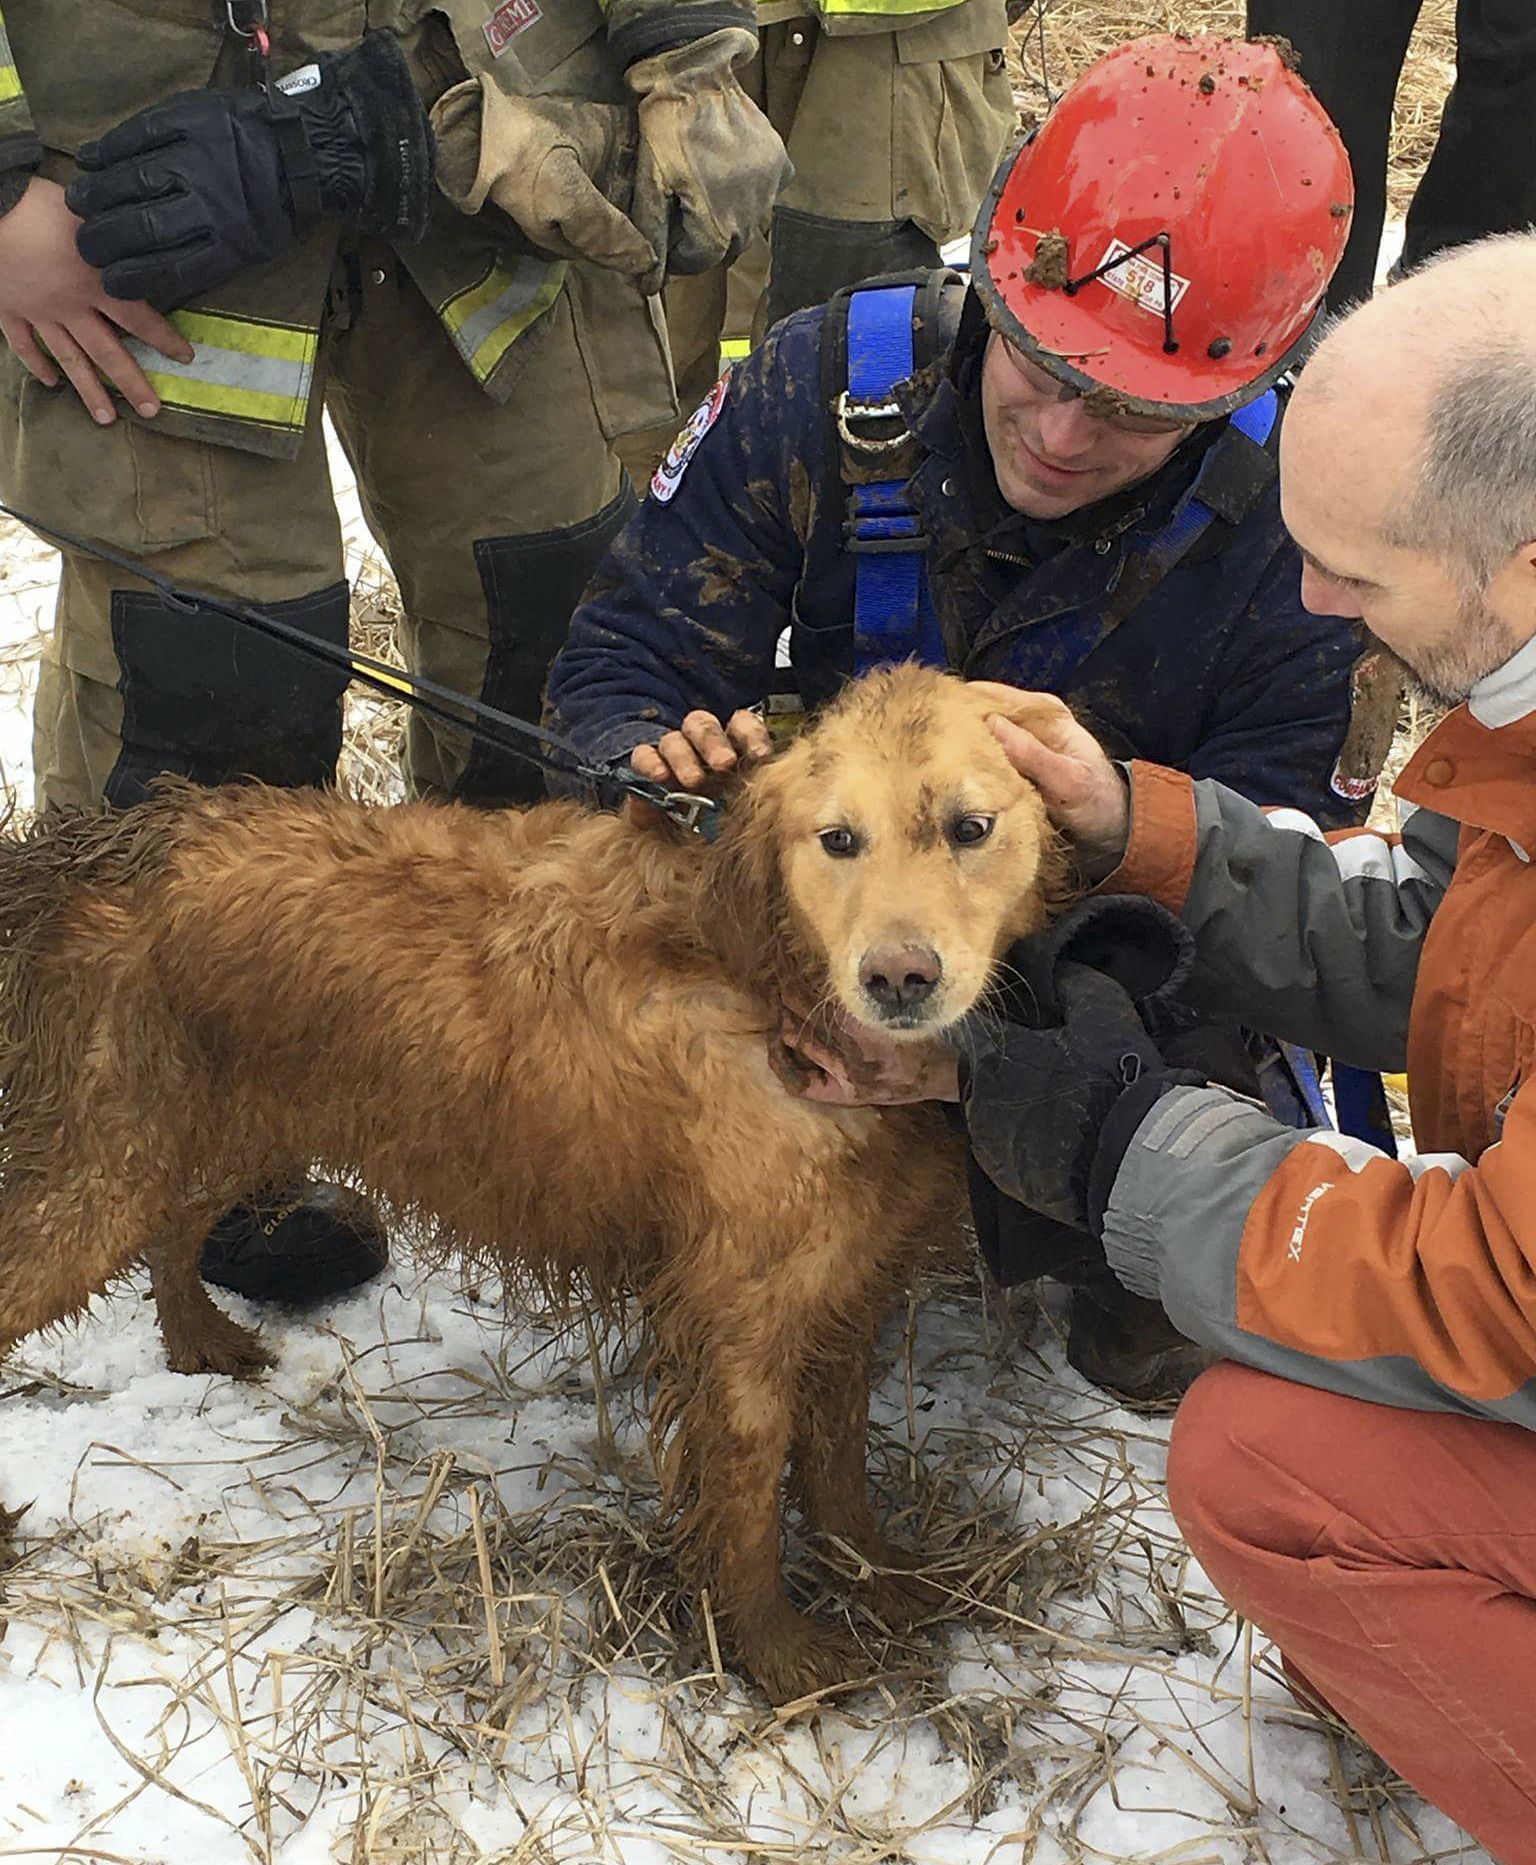 Rescue workers check Skye, a golden retriever, after being rescued in State College, Pennsylvania, on Wednesday.